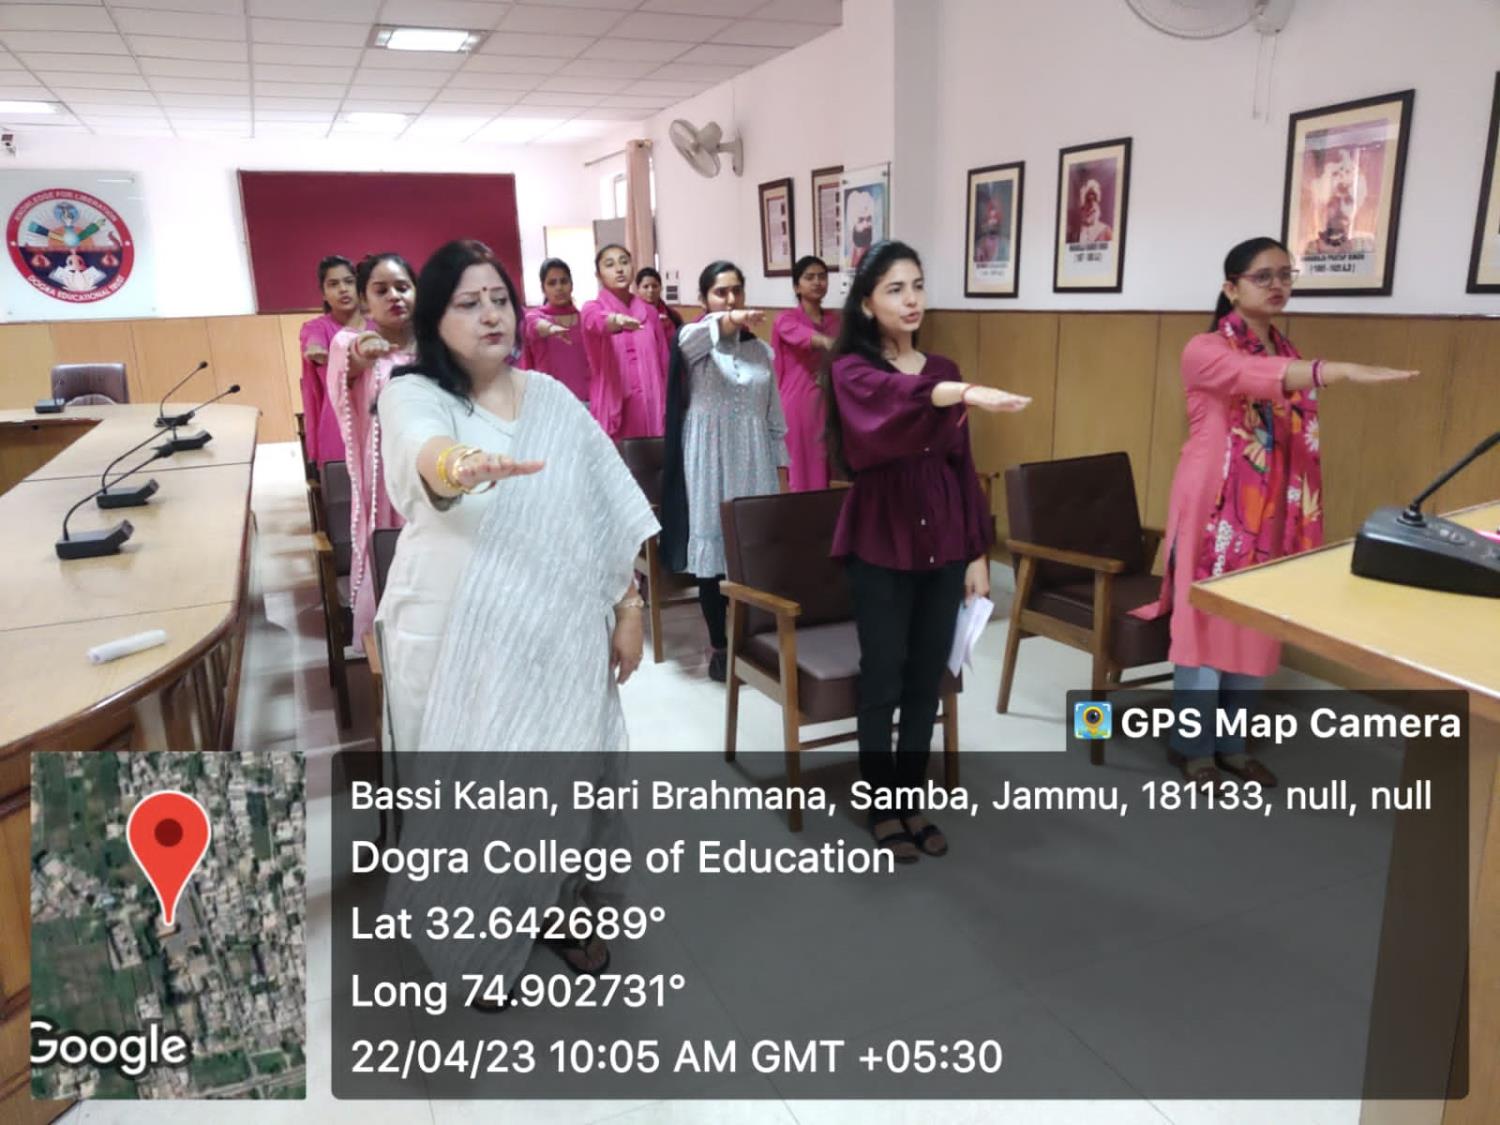 Dogra College of Education Celebrated World Earth Day